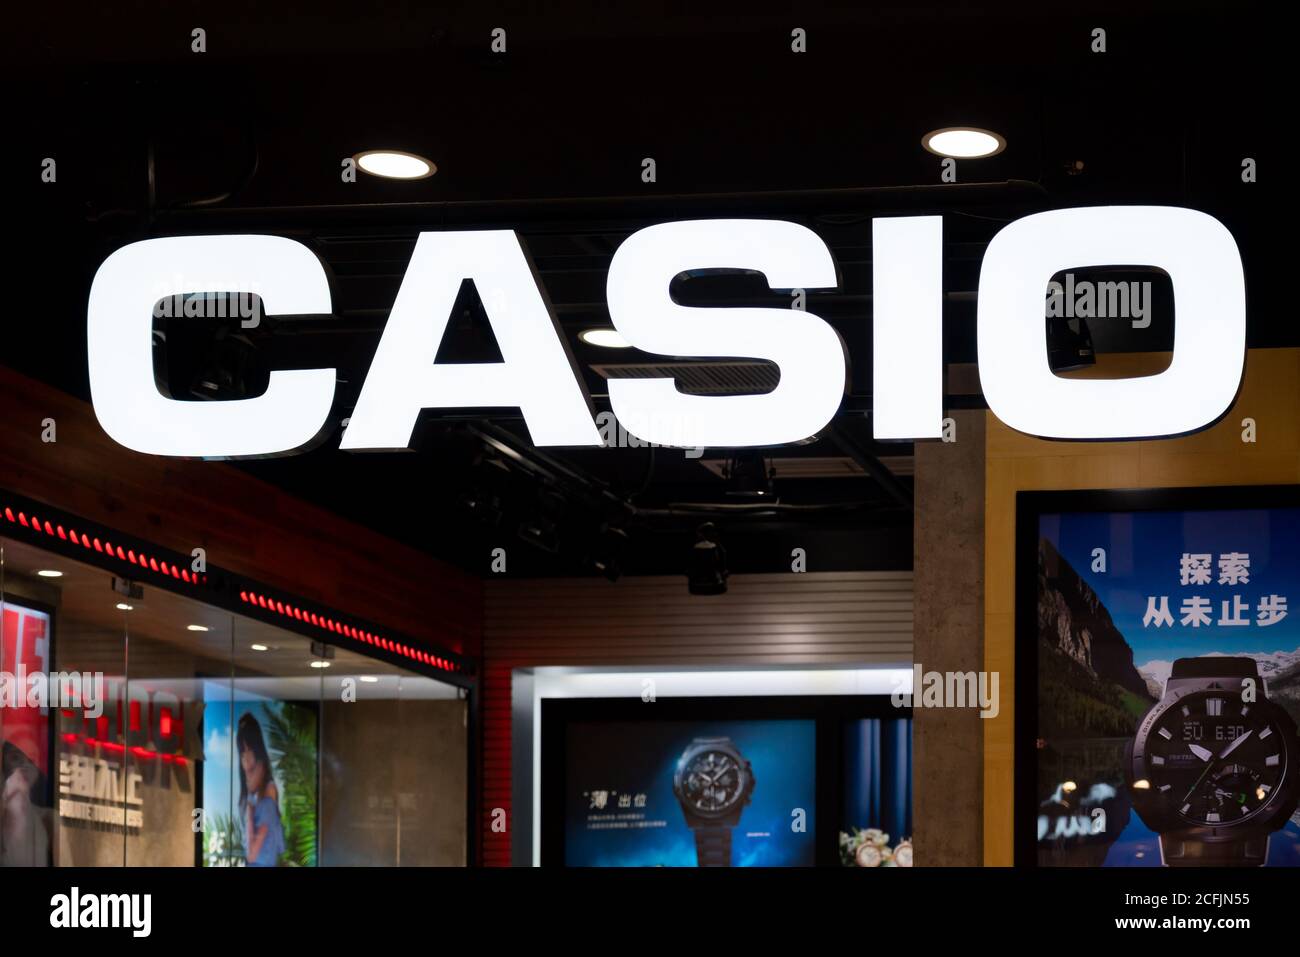 Casio Logo High Resolution Stock Photography and Images - Alamy